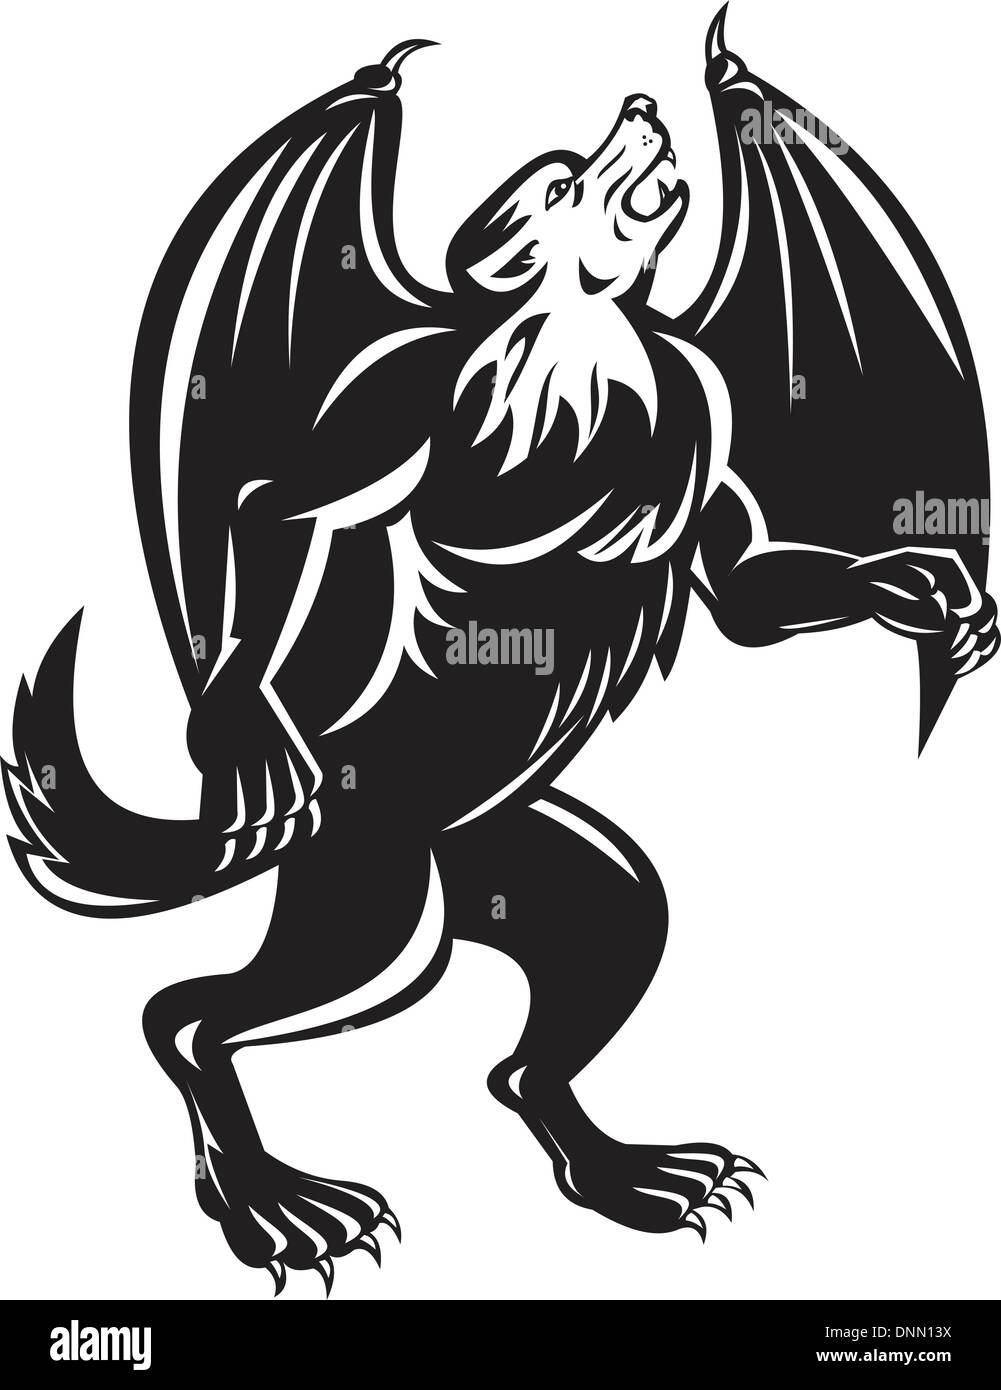 Illustration of a Kludde, a mythical Belgian beast that is a large black  dog, with bat like wings and walks upright on itÕs hind legs facing side  done in black and white